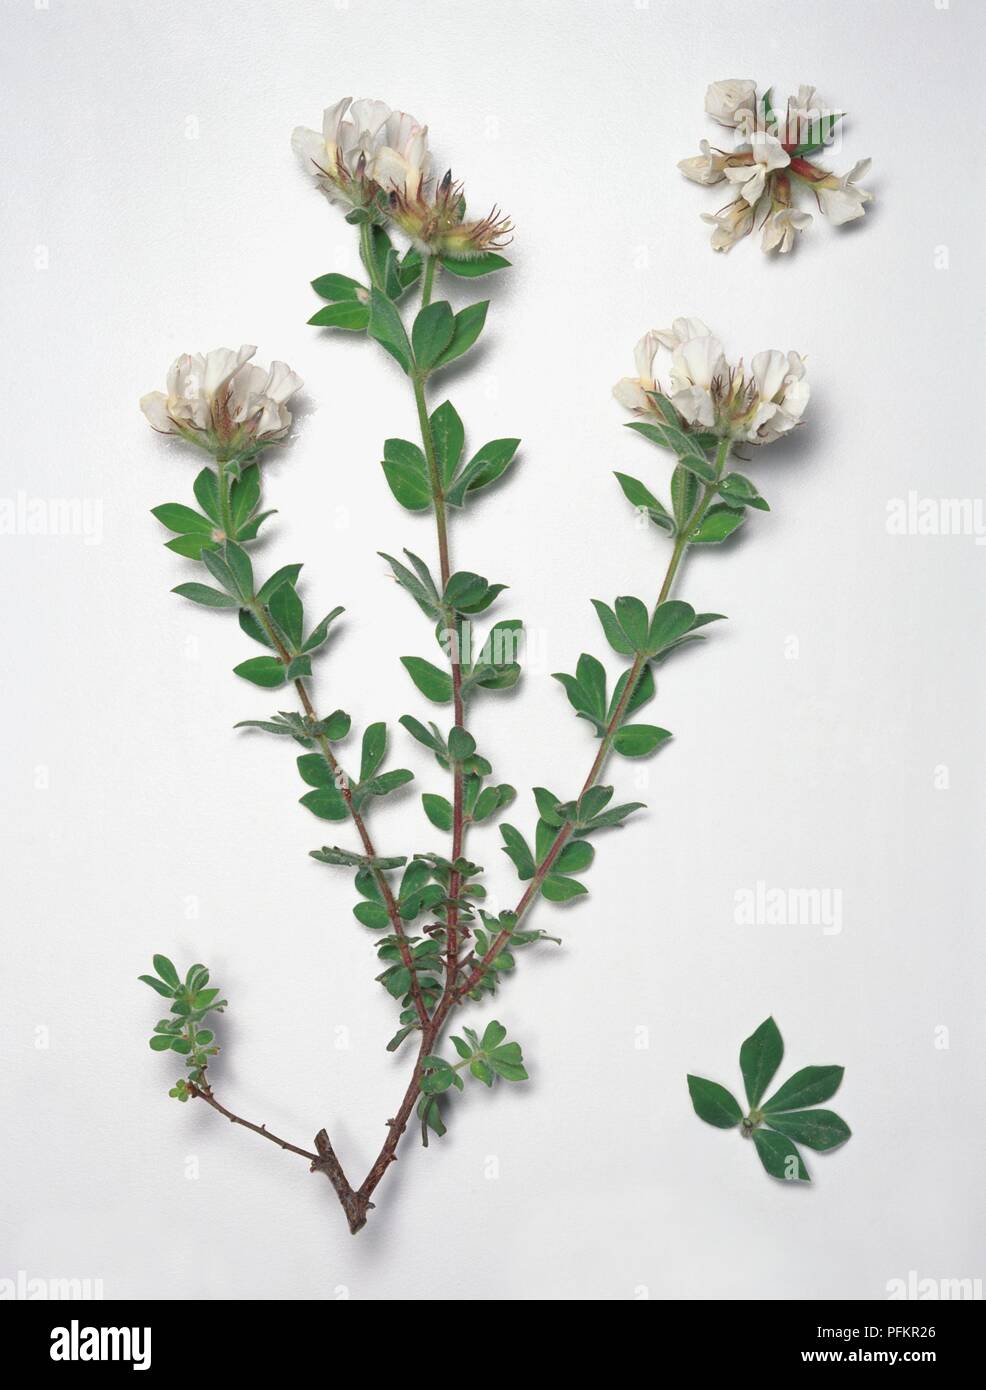 Dorycnium hirsutum (Hairy Canary Clover), white flowers and green leaves on long stems Stock Photo